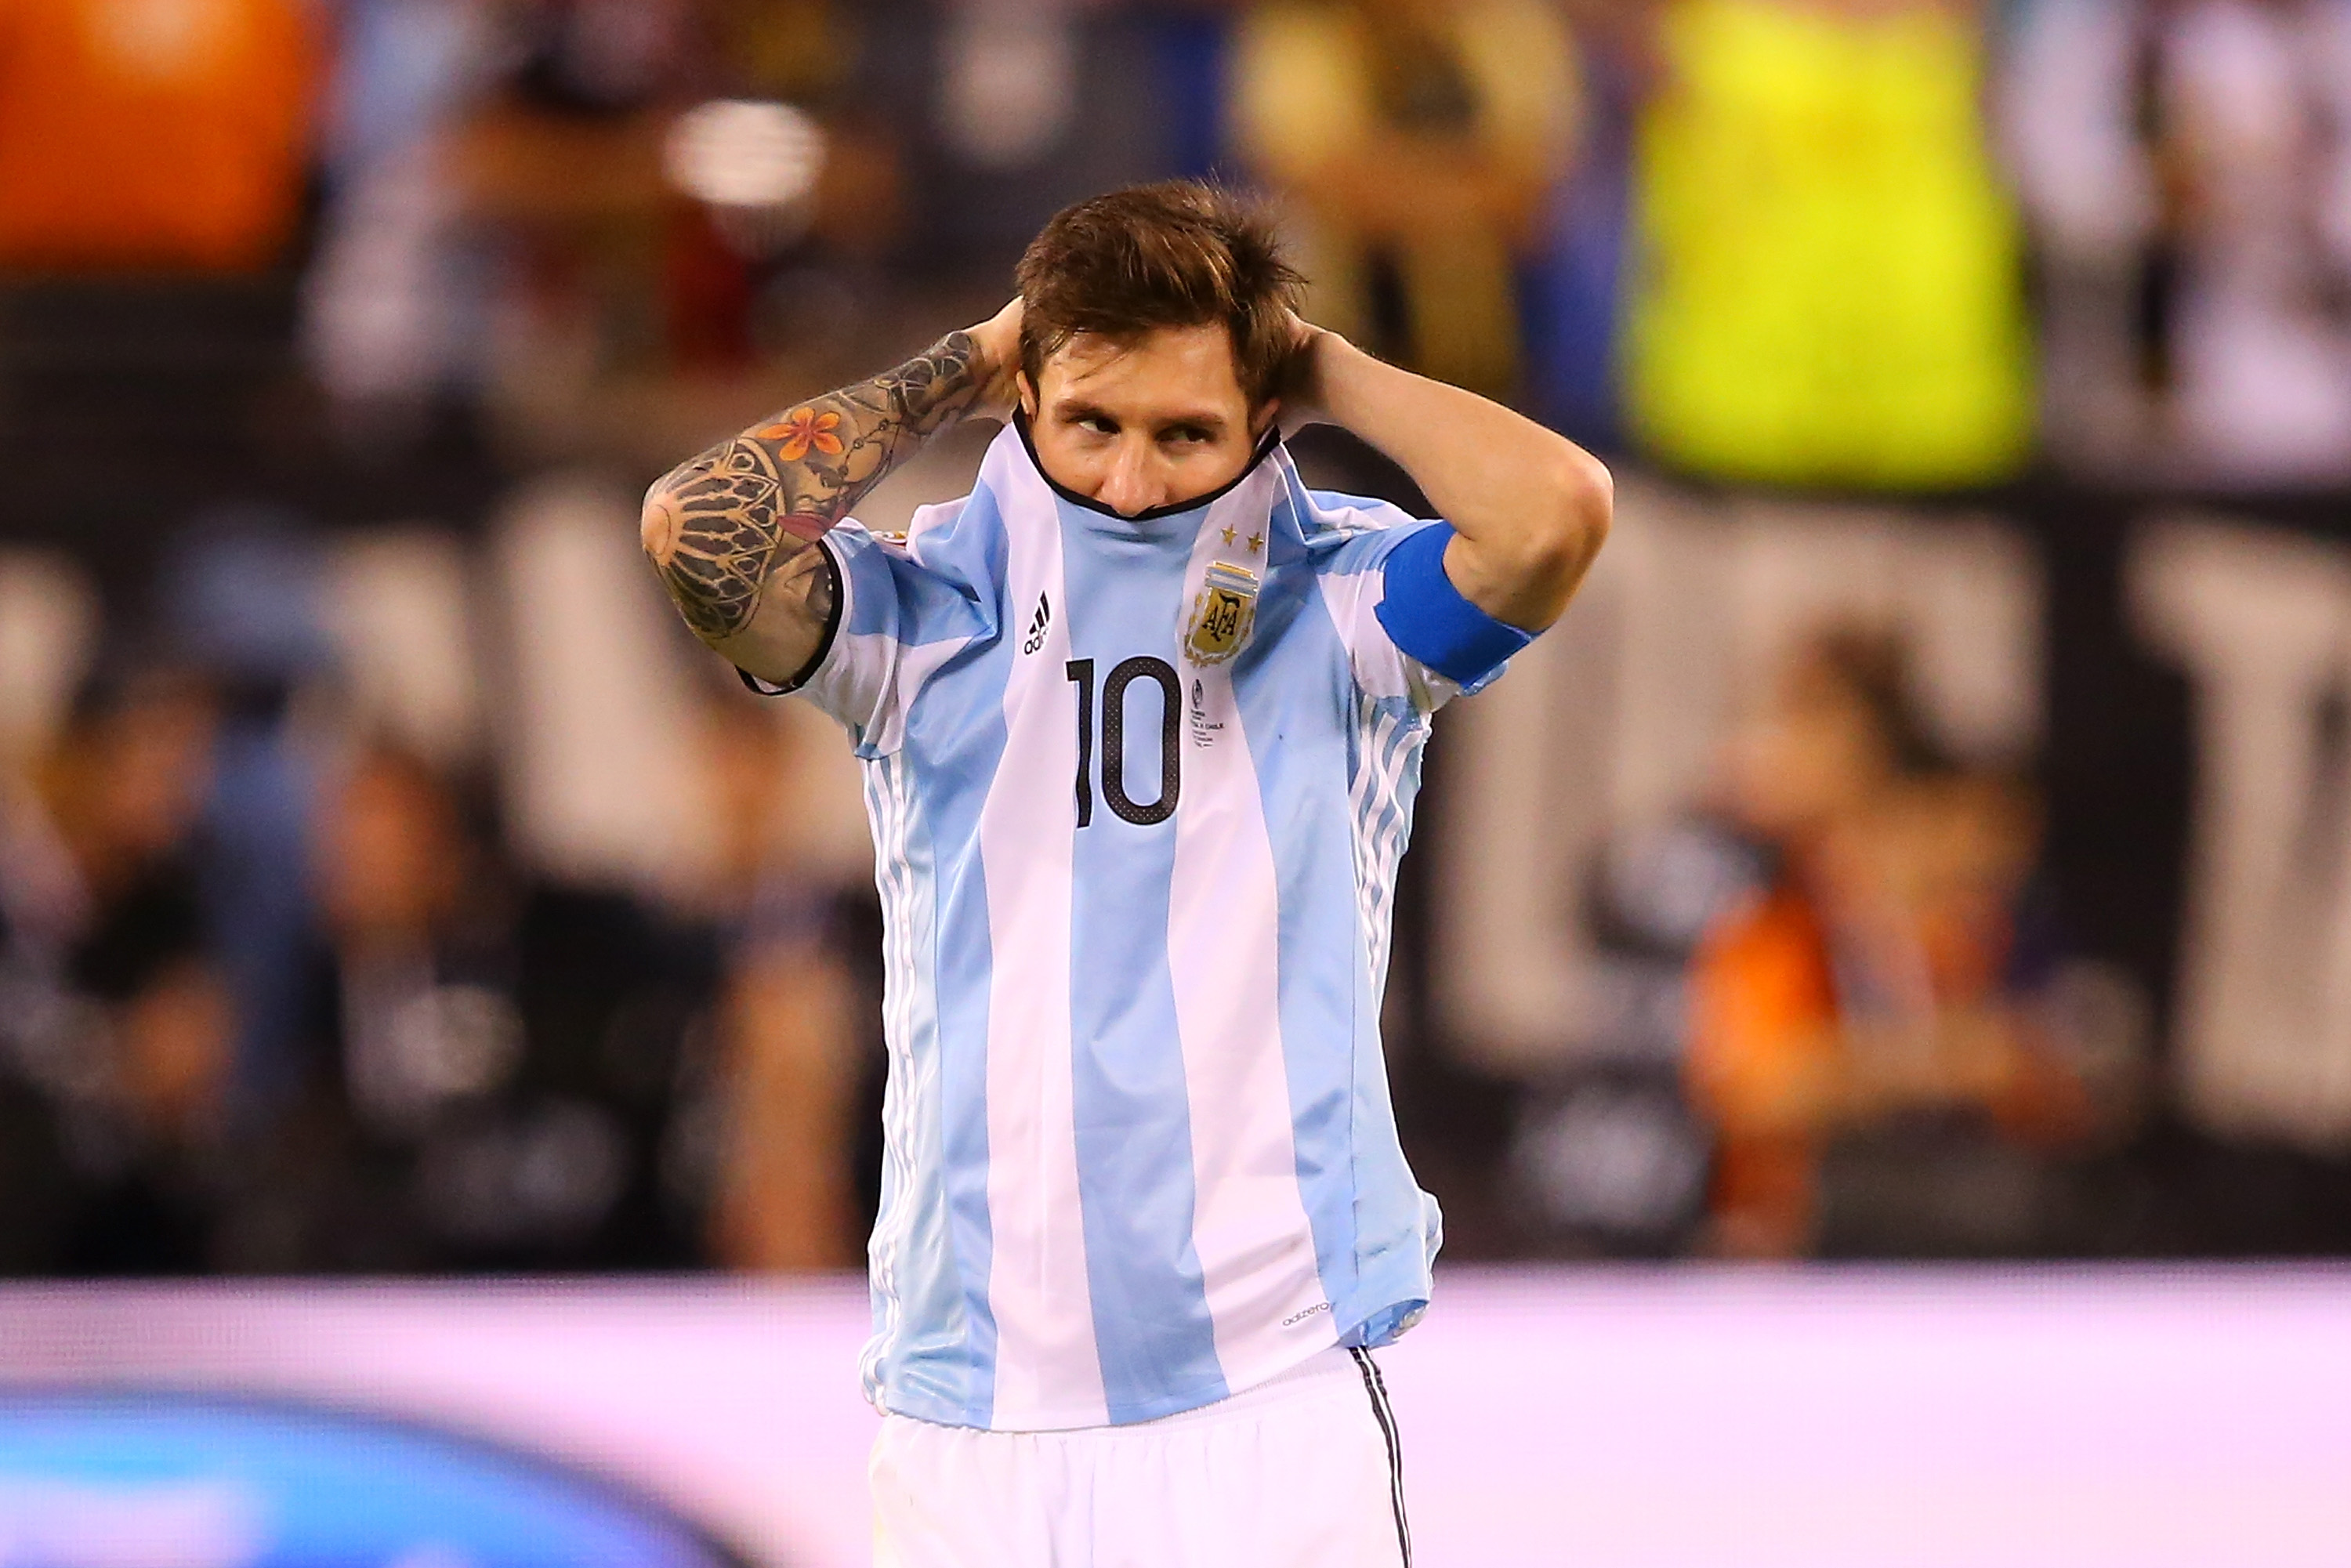 Lionel Messi and Argentina | What happened to the fairytale?